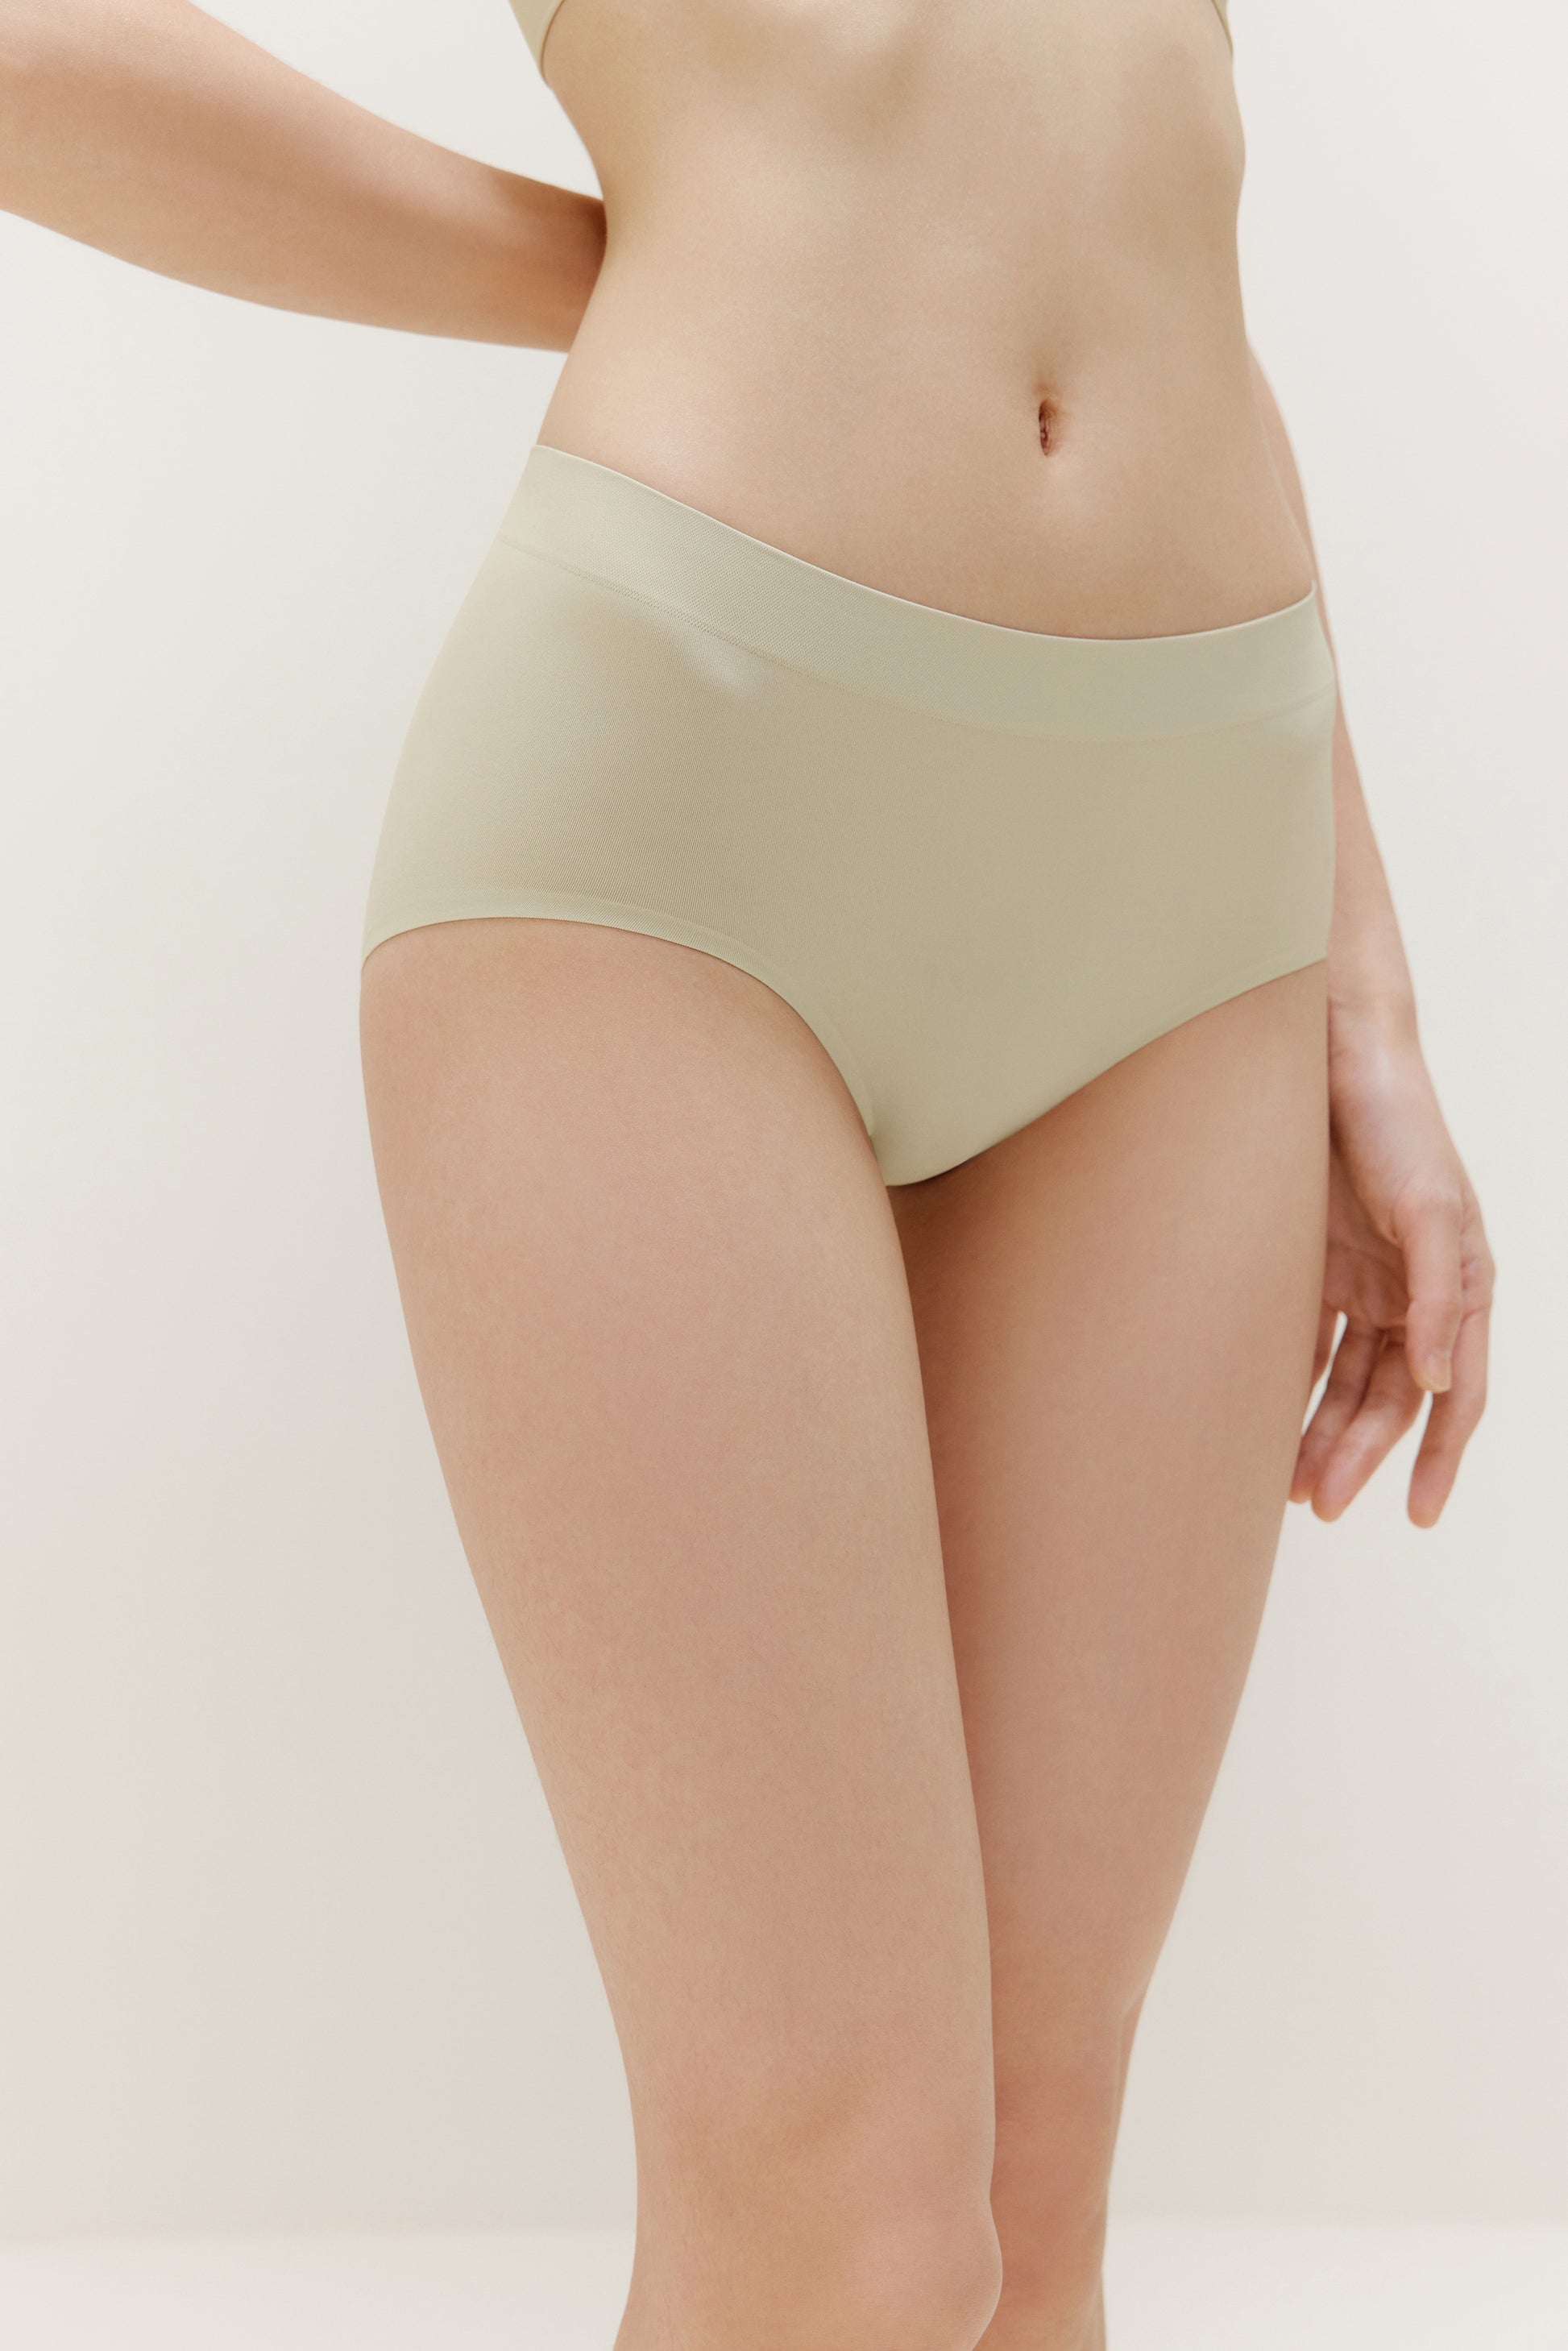 Soft briefs for Women. Seamless, no itchy labels. From organic Cotton. -  SAM, Sensory & More